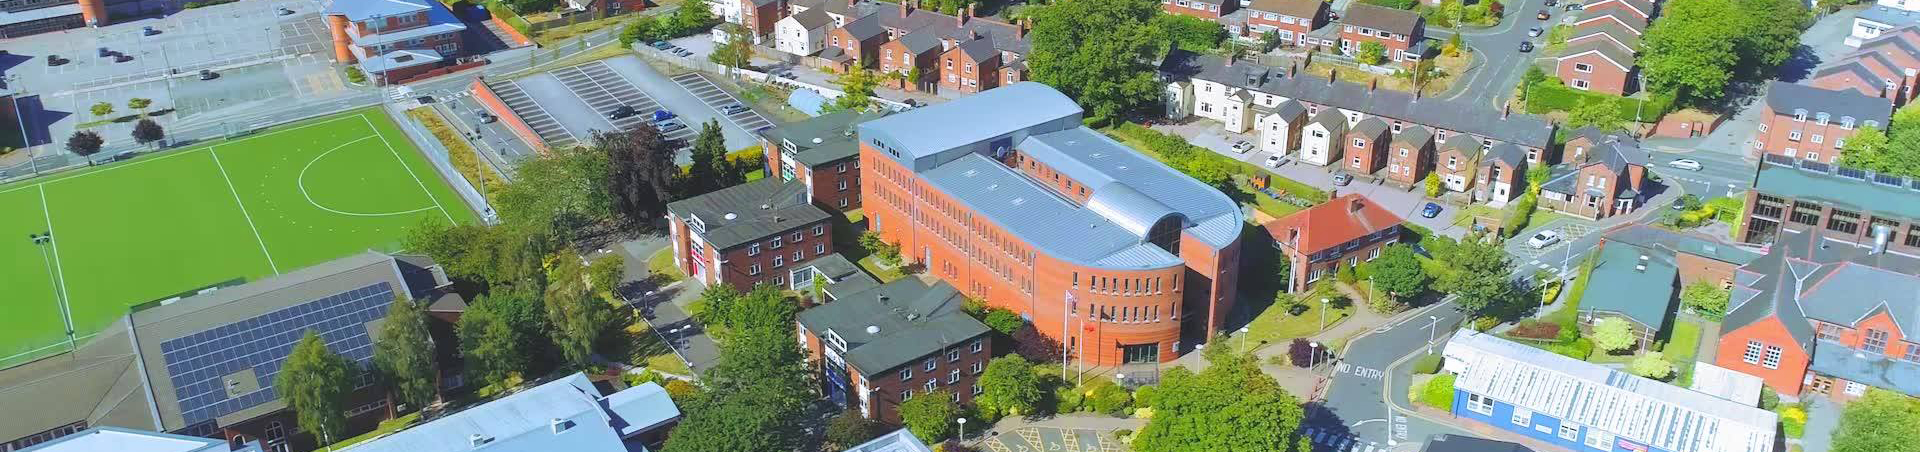 University of Chester Campus